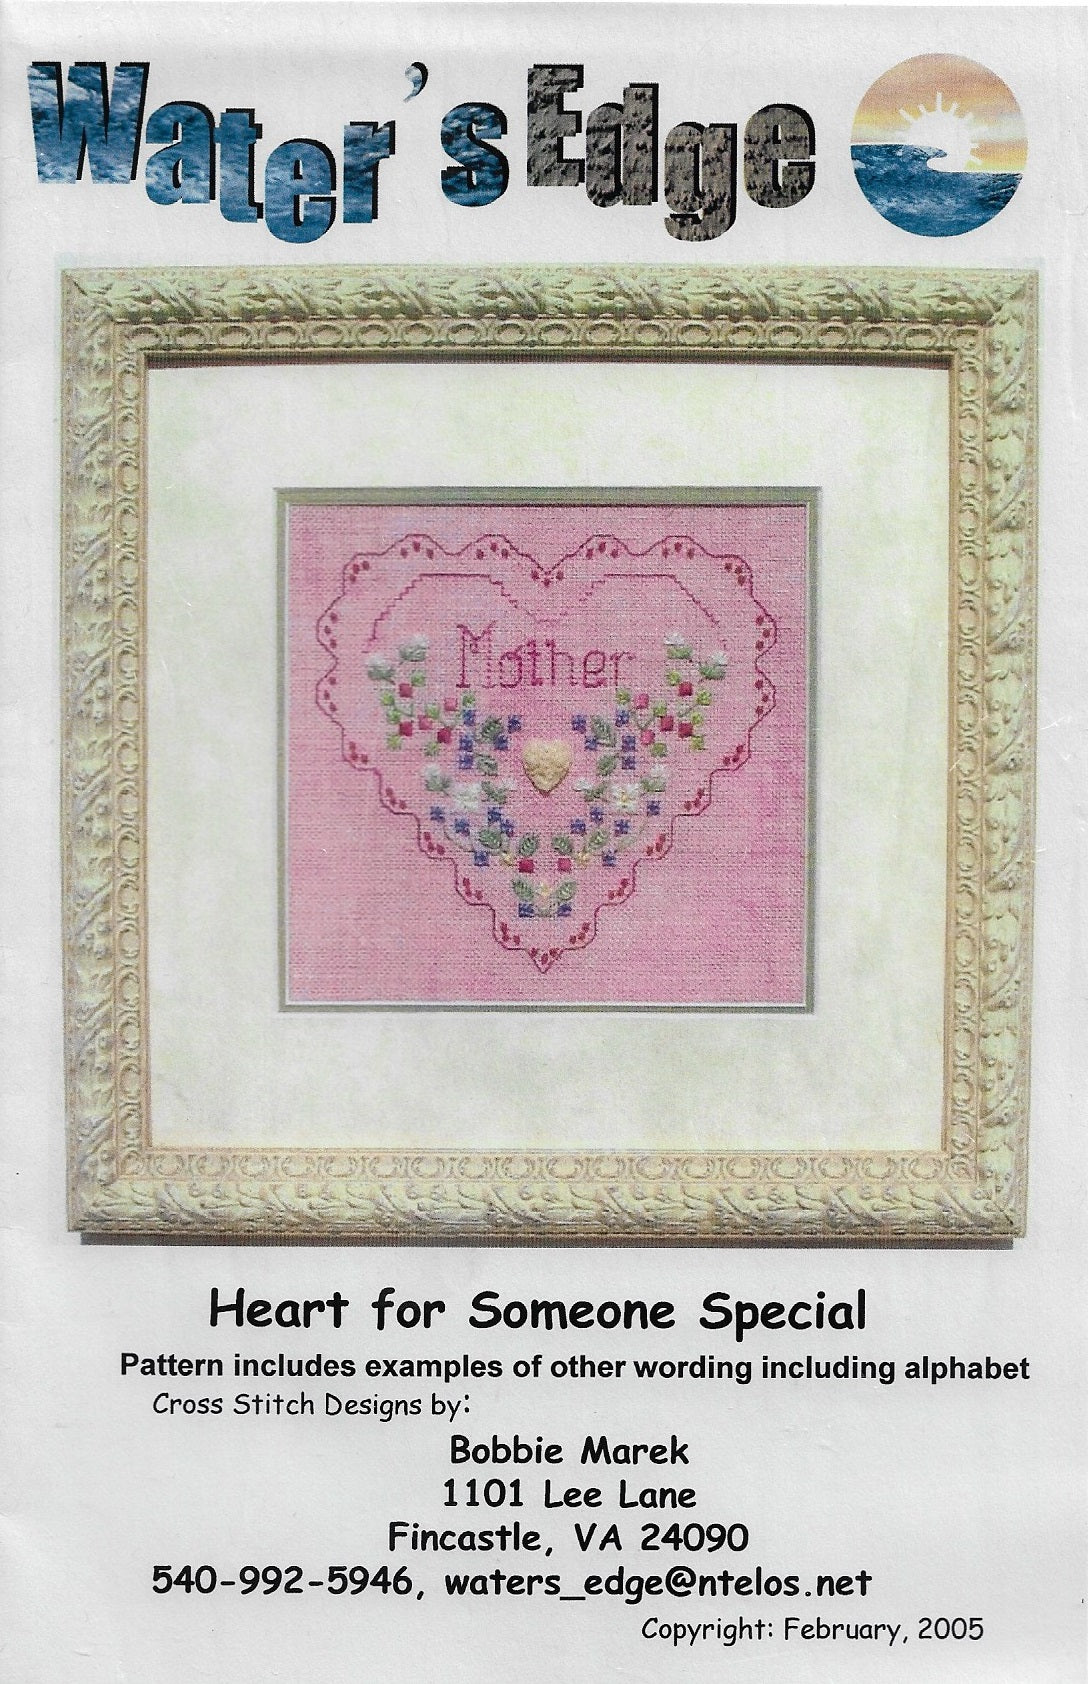 Water's Edge Heart for Someone Special cross stitch pattern